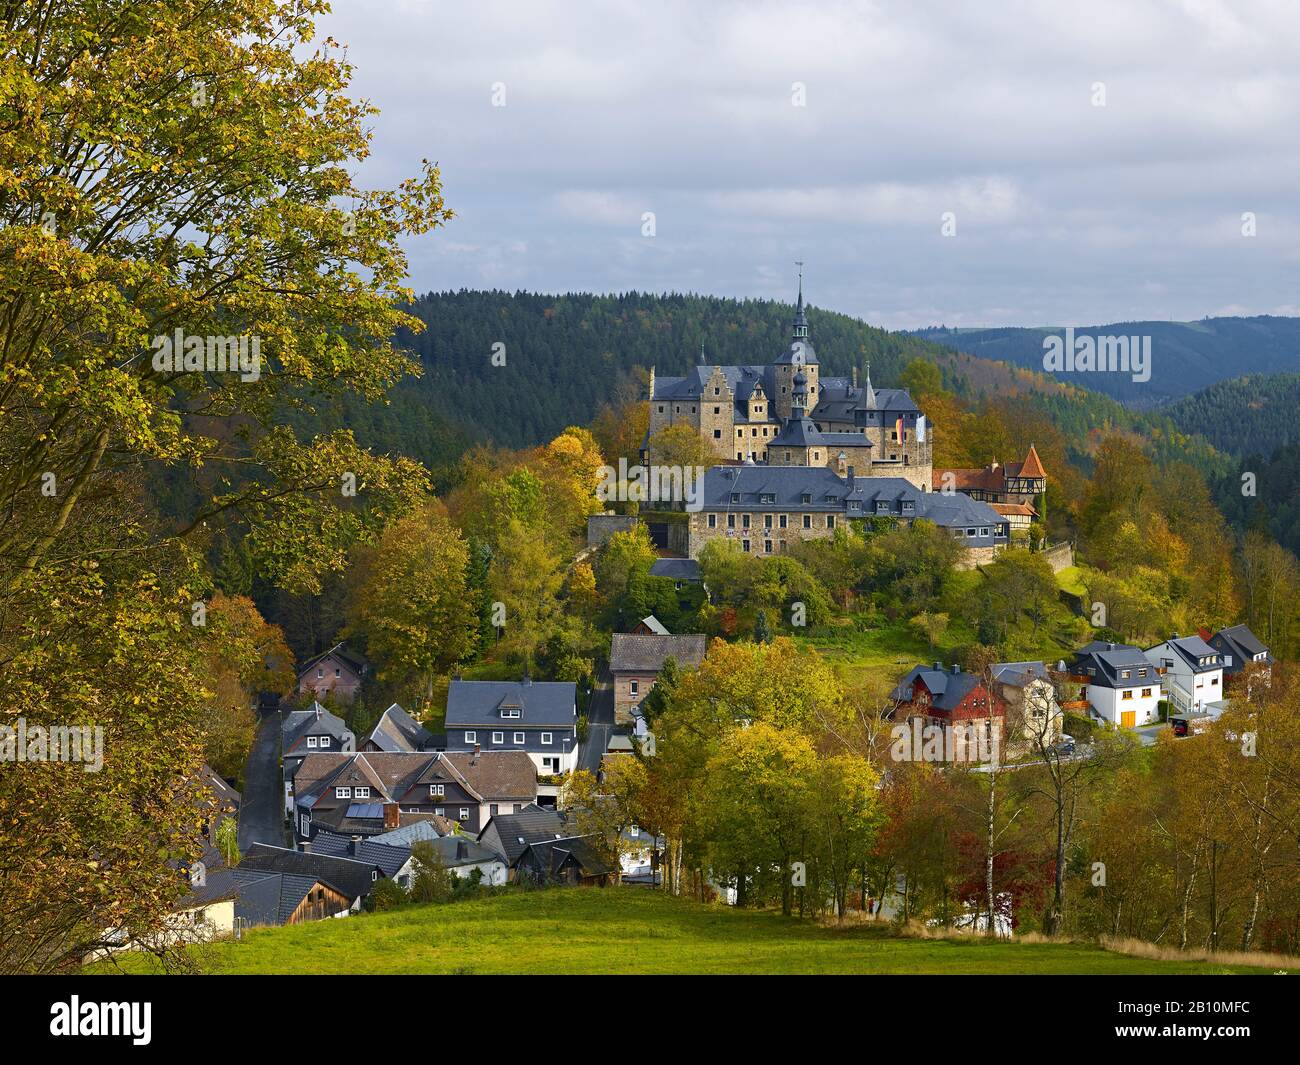 Lauenstein Castle and town near Ludwigsstadt, Upper Franconia, Bavaria, Germany Stock Photo